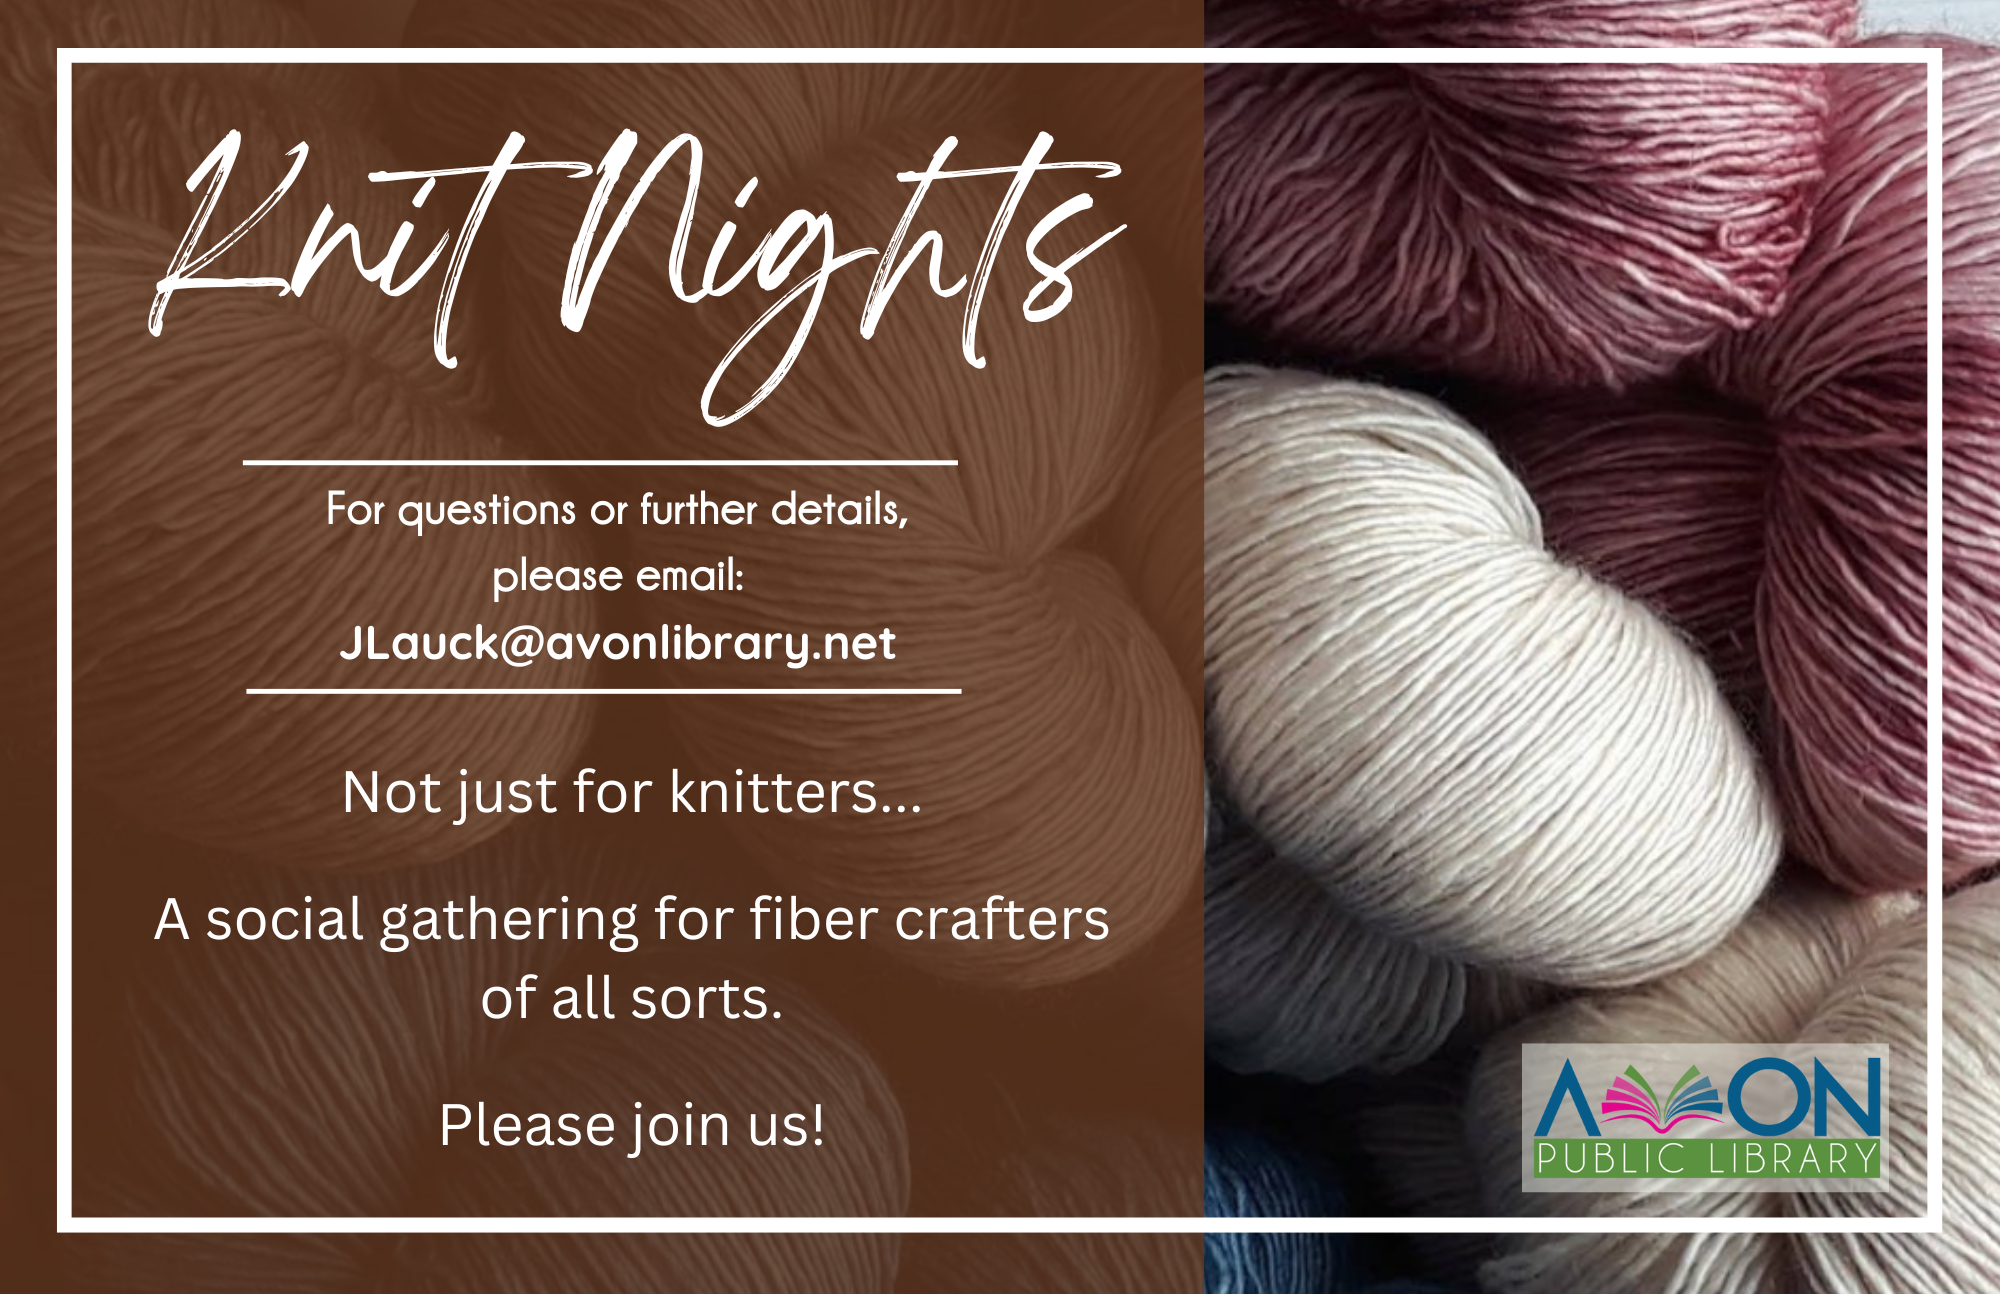 Knit Nights at the Library -- all fiber crafters welcome